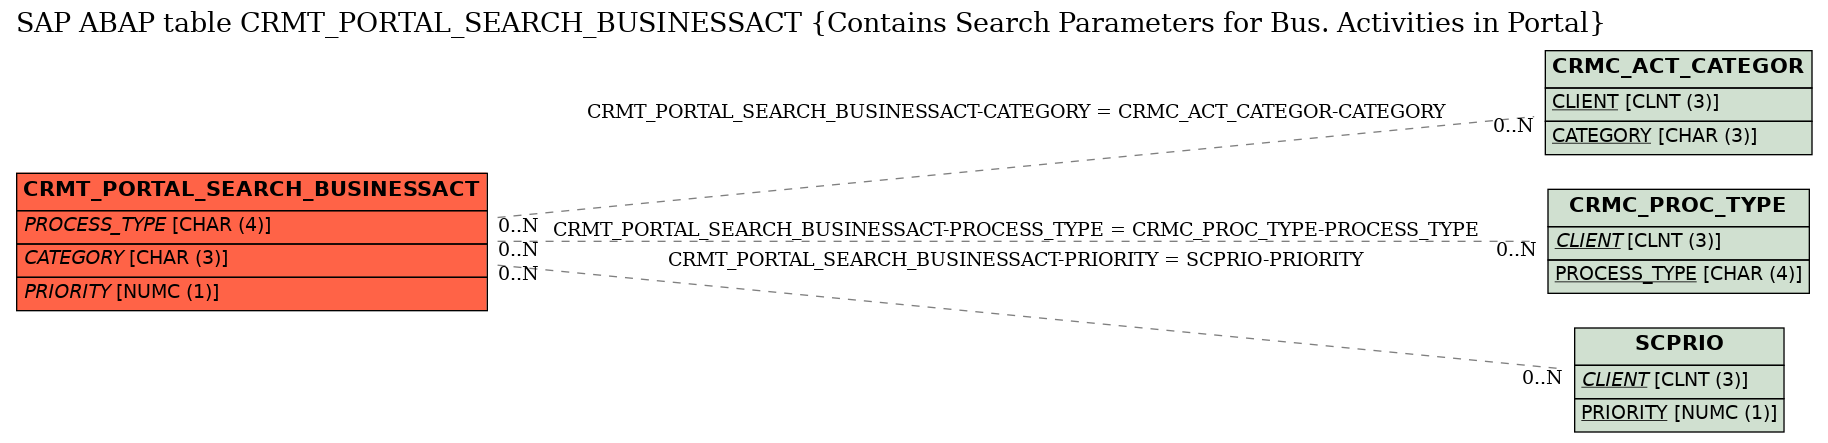 E-R Diagram for table CRMT_PORTAL_SEARCH_BUSINESSACT (Contains Search Parameters for Bus. Activities in Portal)